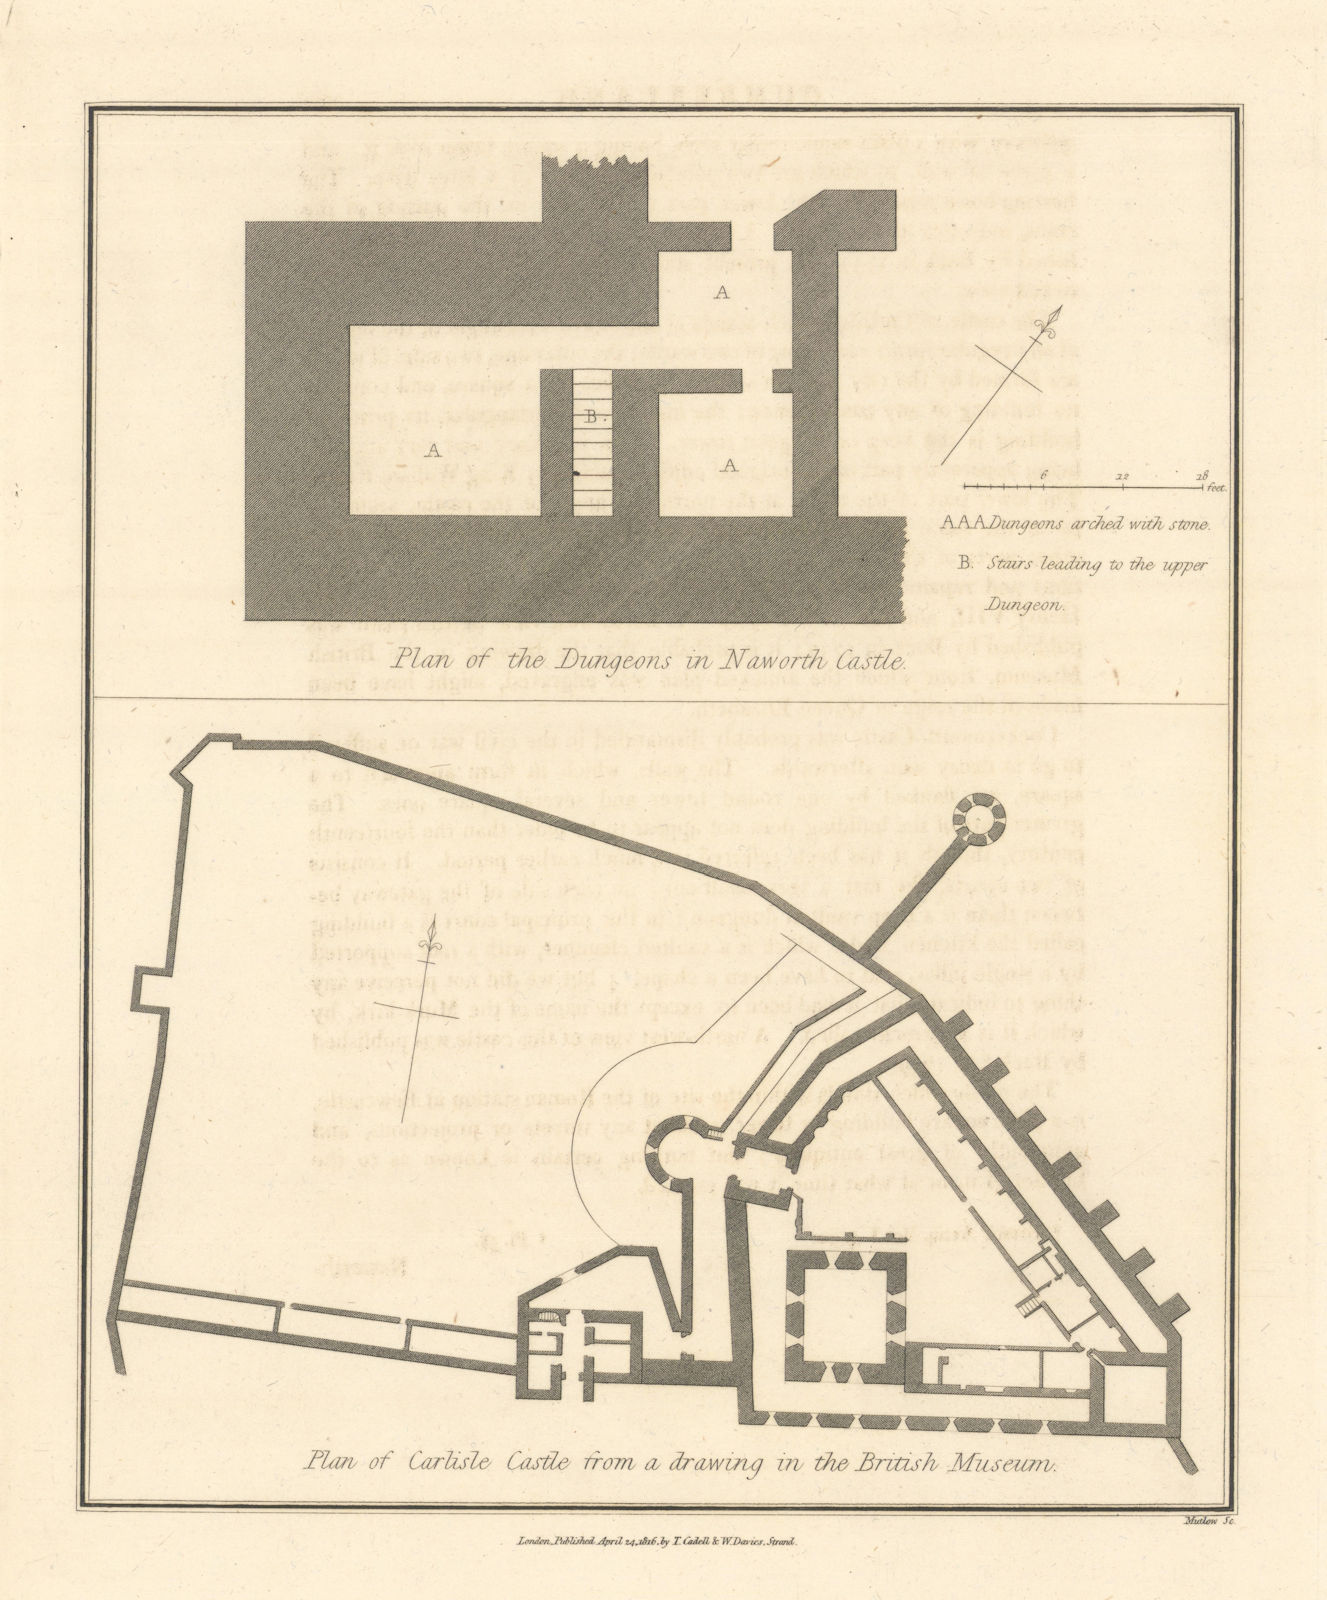 Associate Product Plan of Carlisle Castle & plan of the dungeons in Naworth Castle 1816 old map